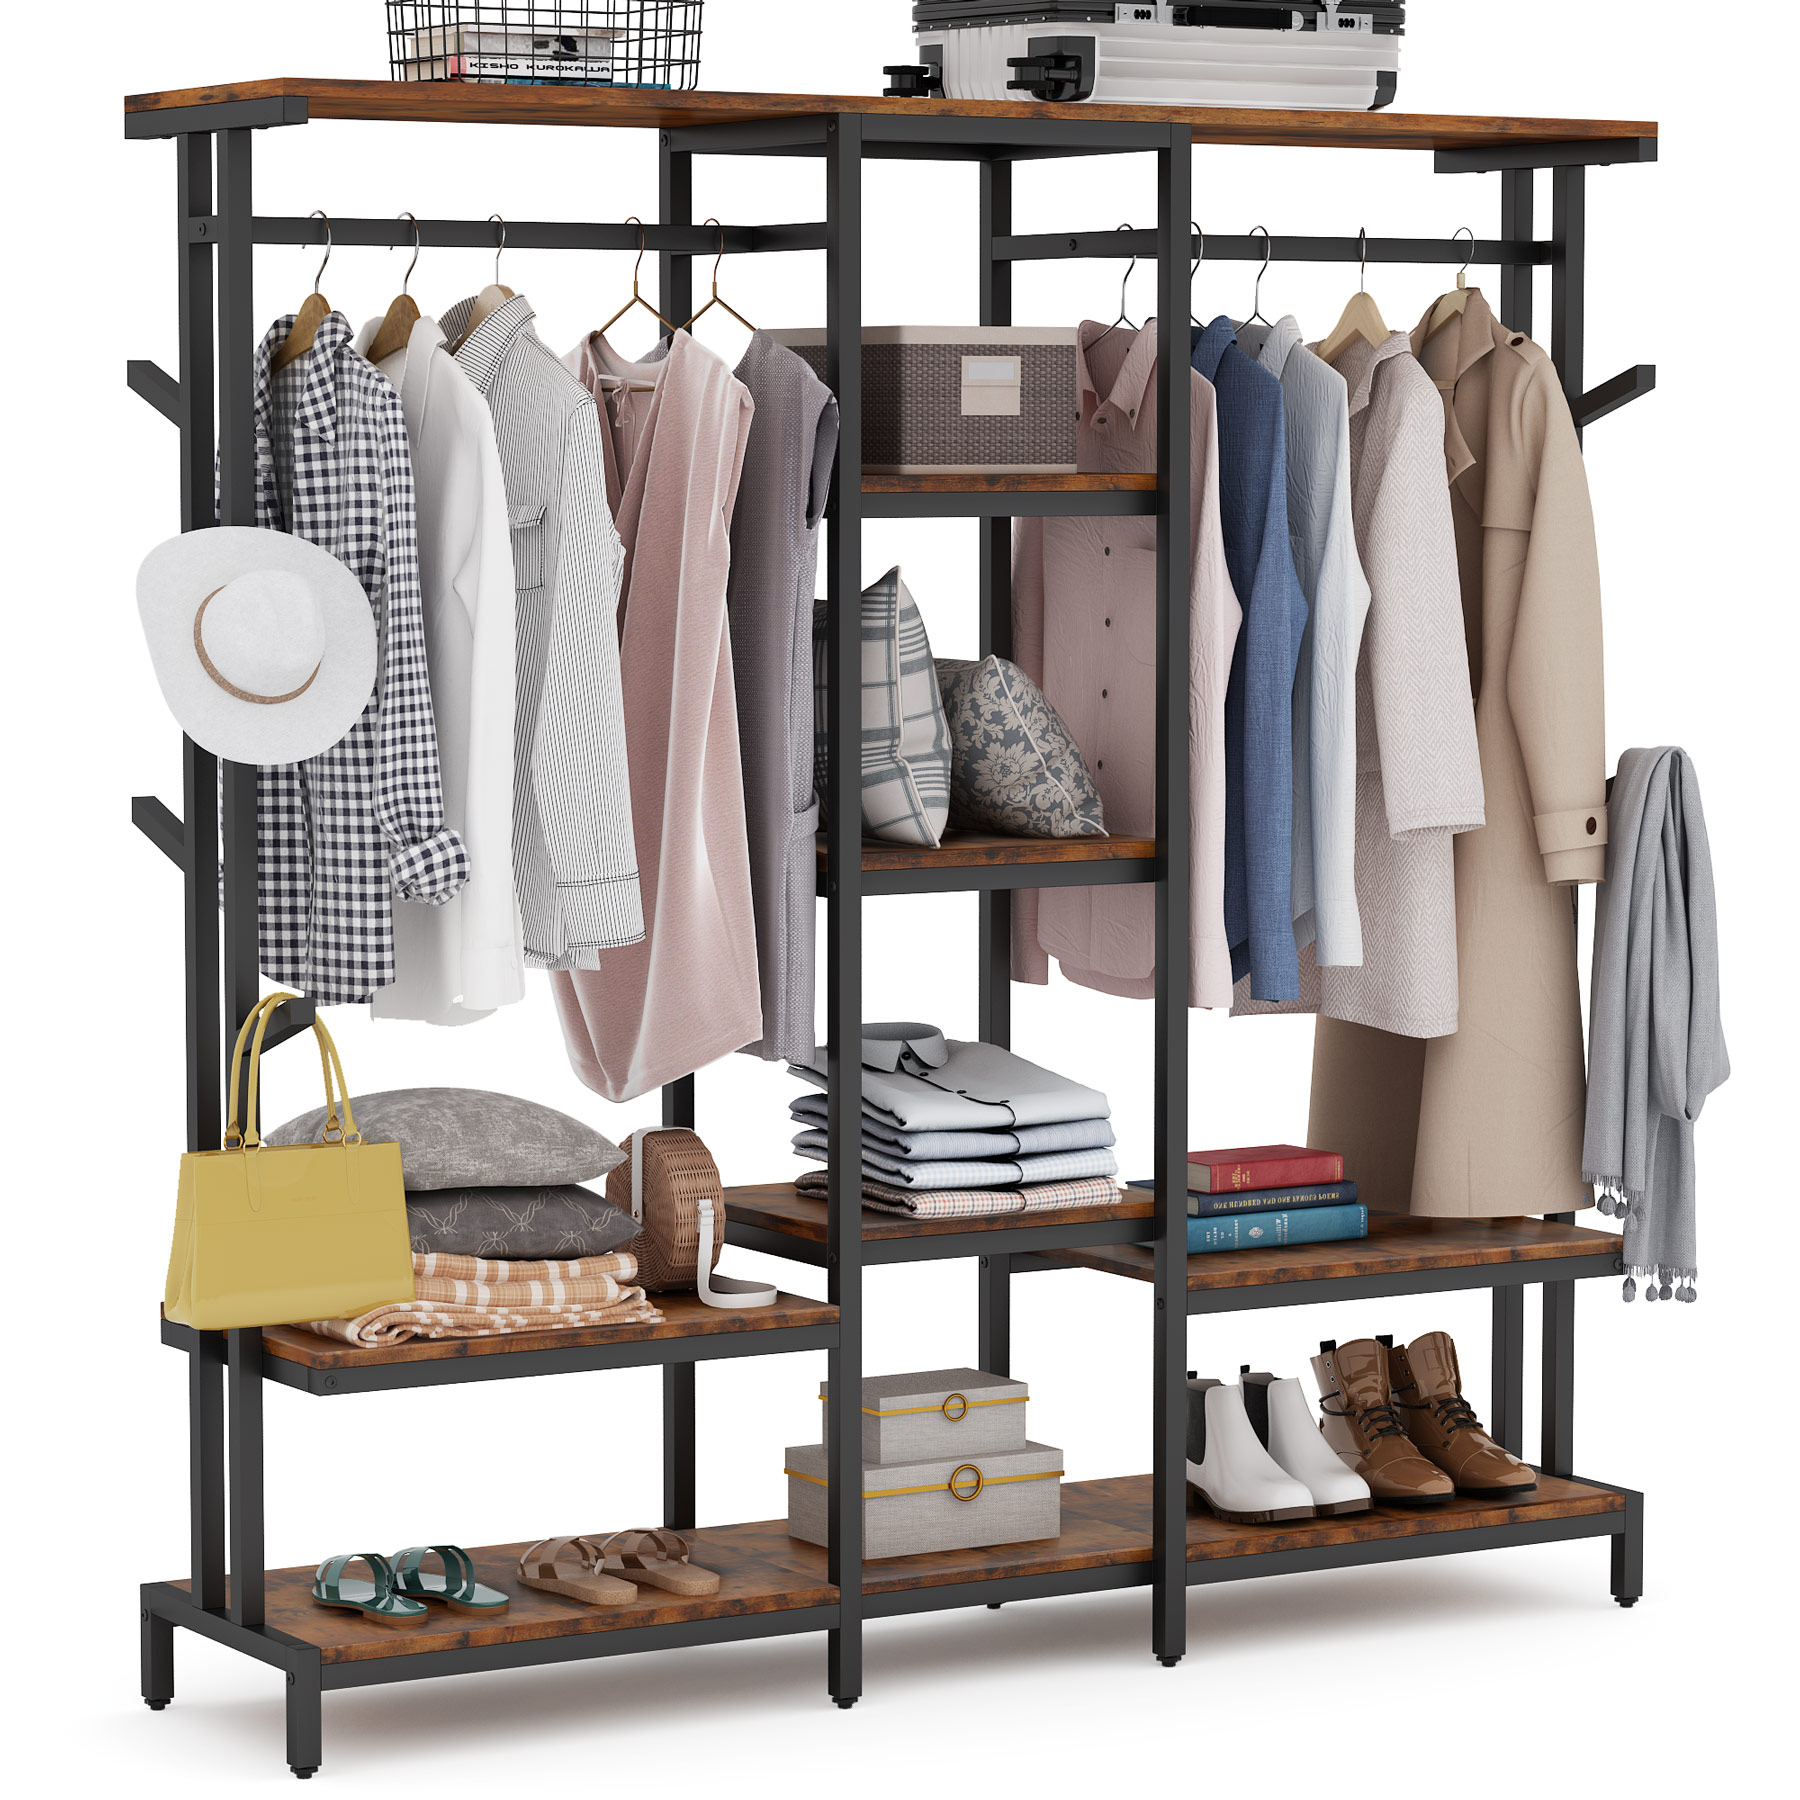 Tribesigns 75 inch Freestanding Closet Organizer with Shelves and